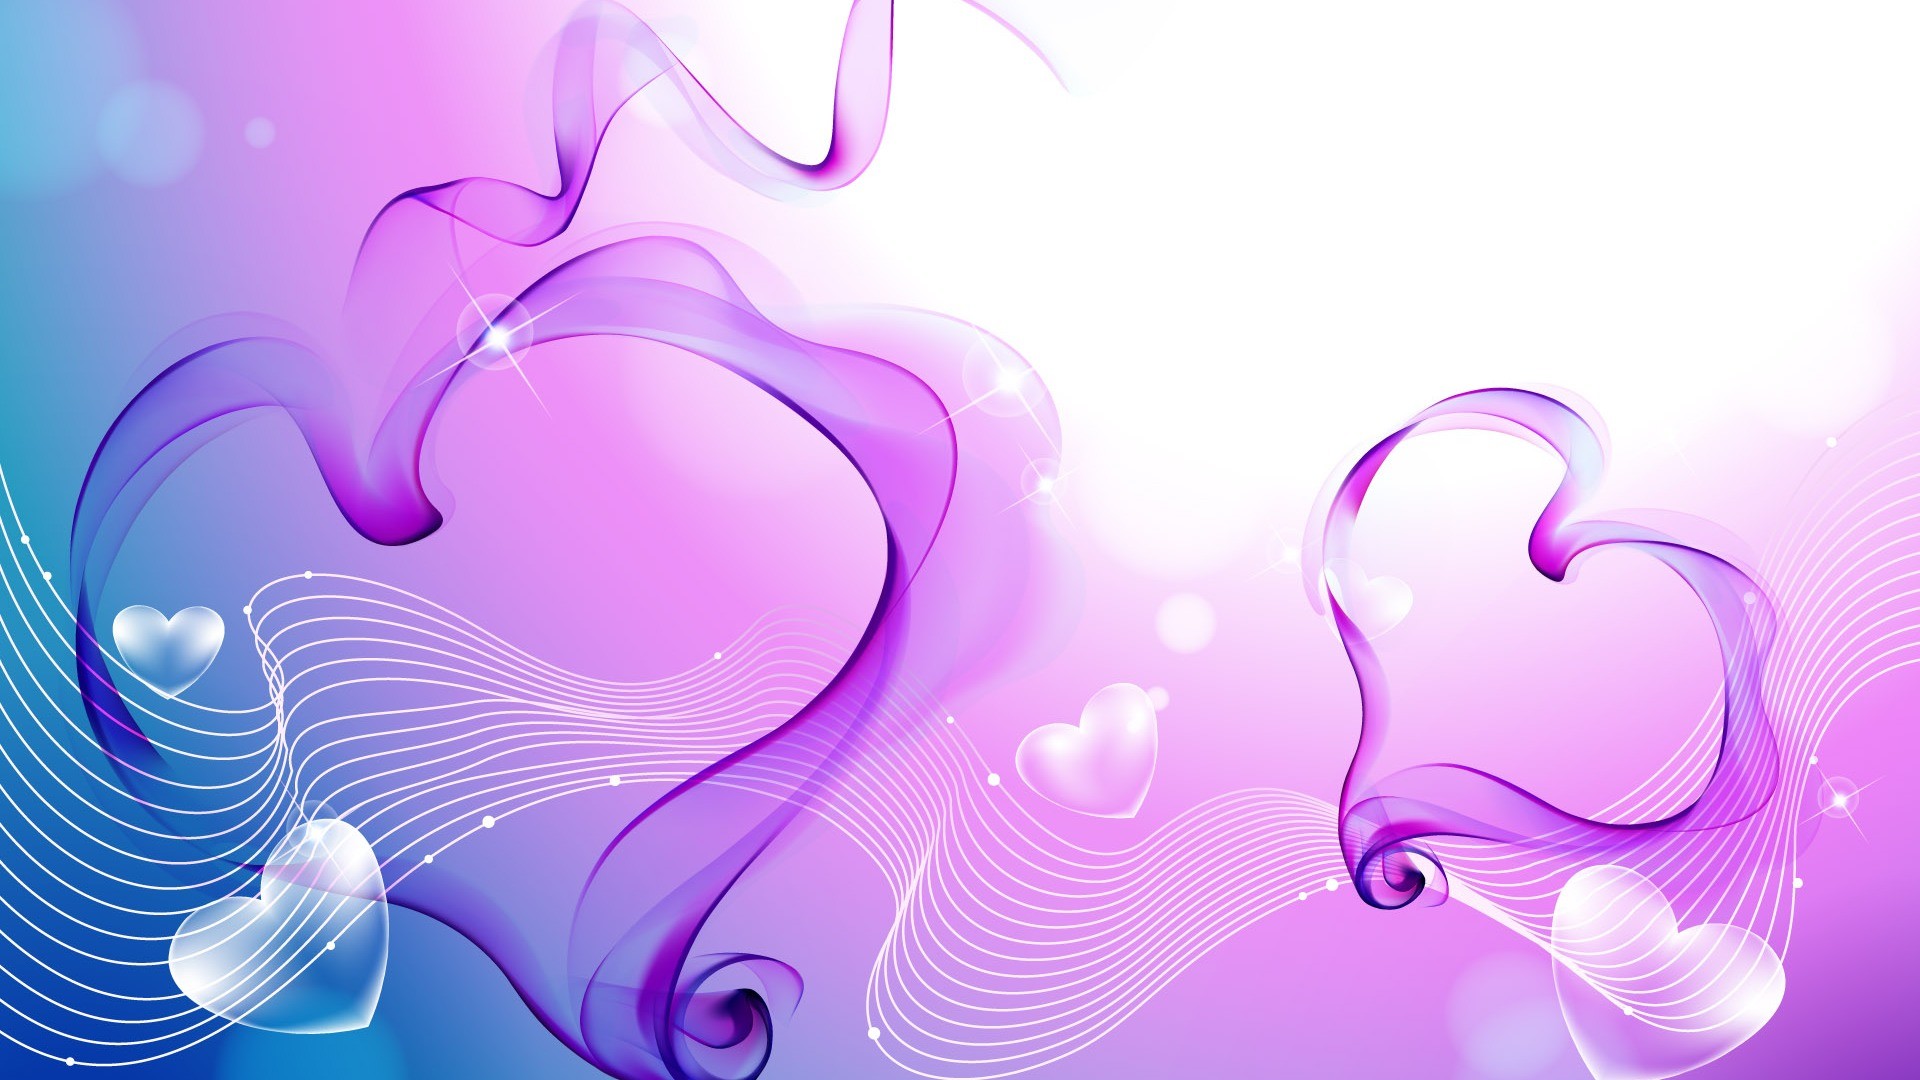 File Name: Love Abstract Wallpaper